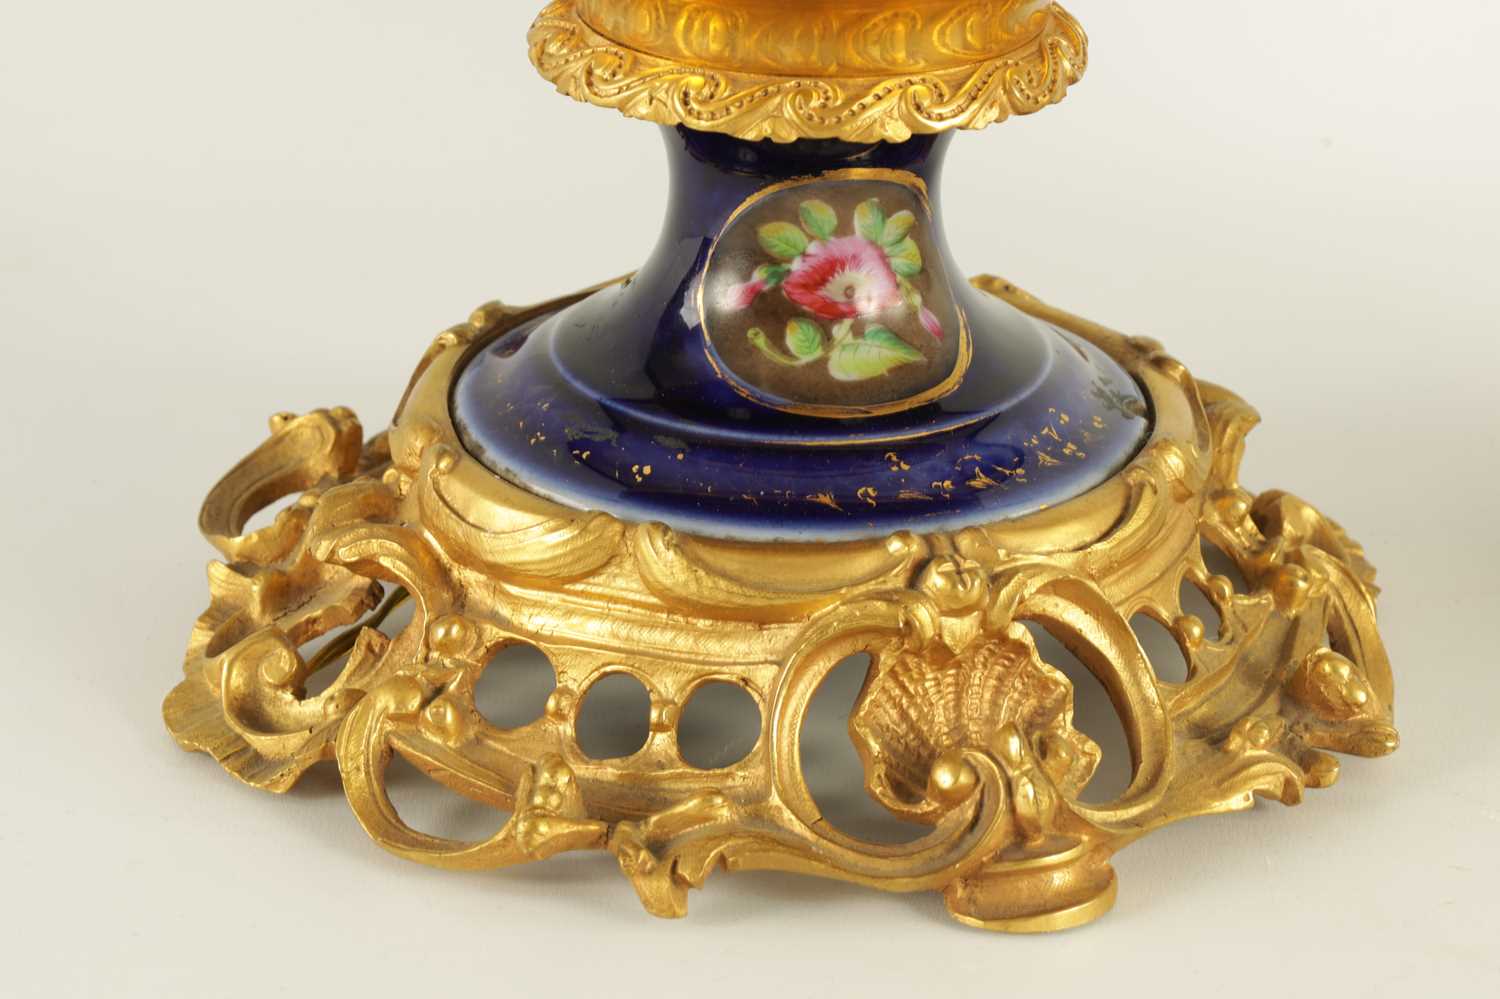 A PAIR OF 19TH CENTURY CONTINENTAL ORMOLU MOUNTED PORCELAIN LAMP BASES - Image 6 of 13